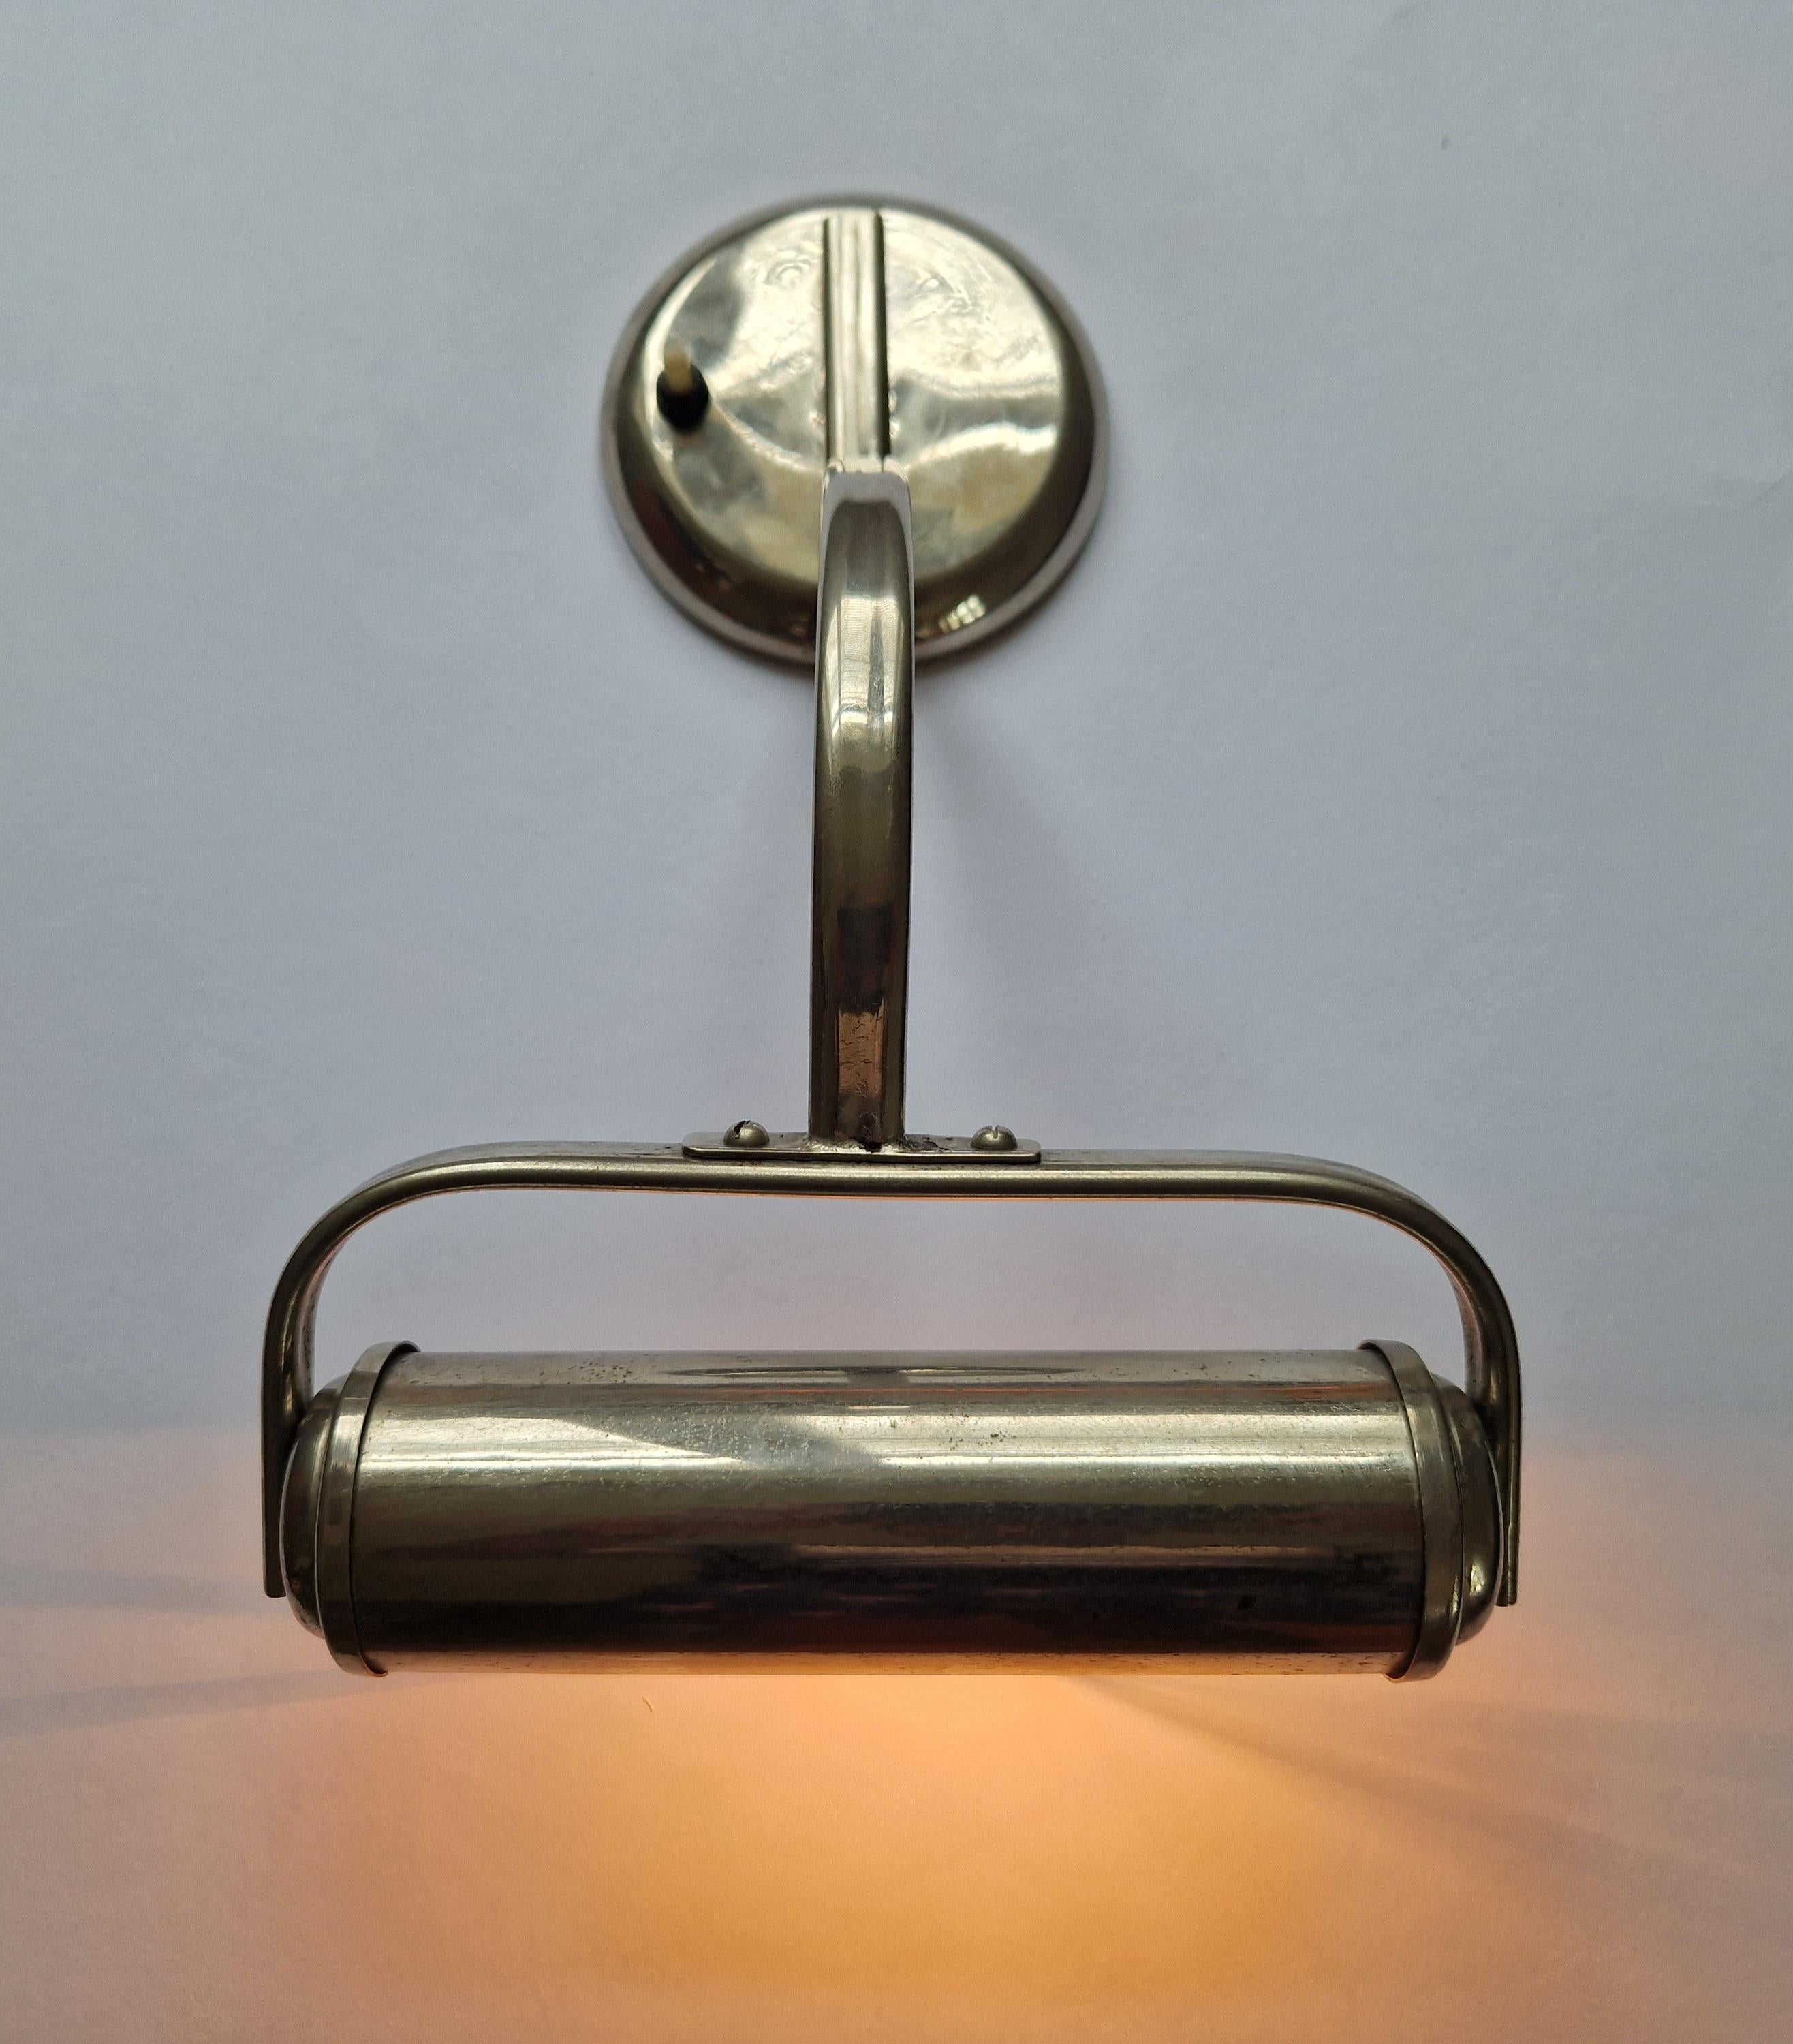 Rare Chrome Adjustable Art Deco / Functionalism Wall Lamp, 1930s For Sale 4